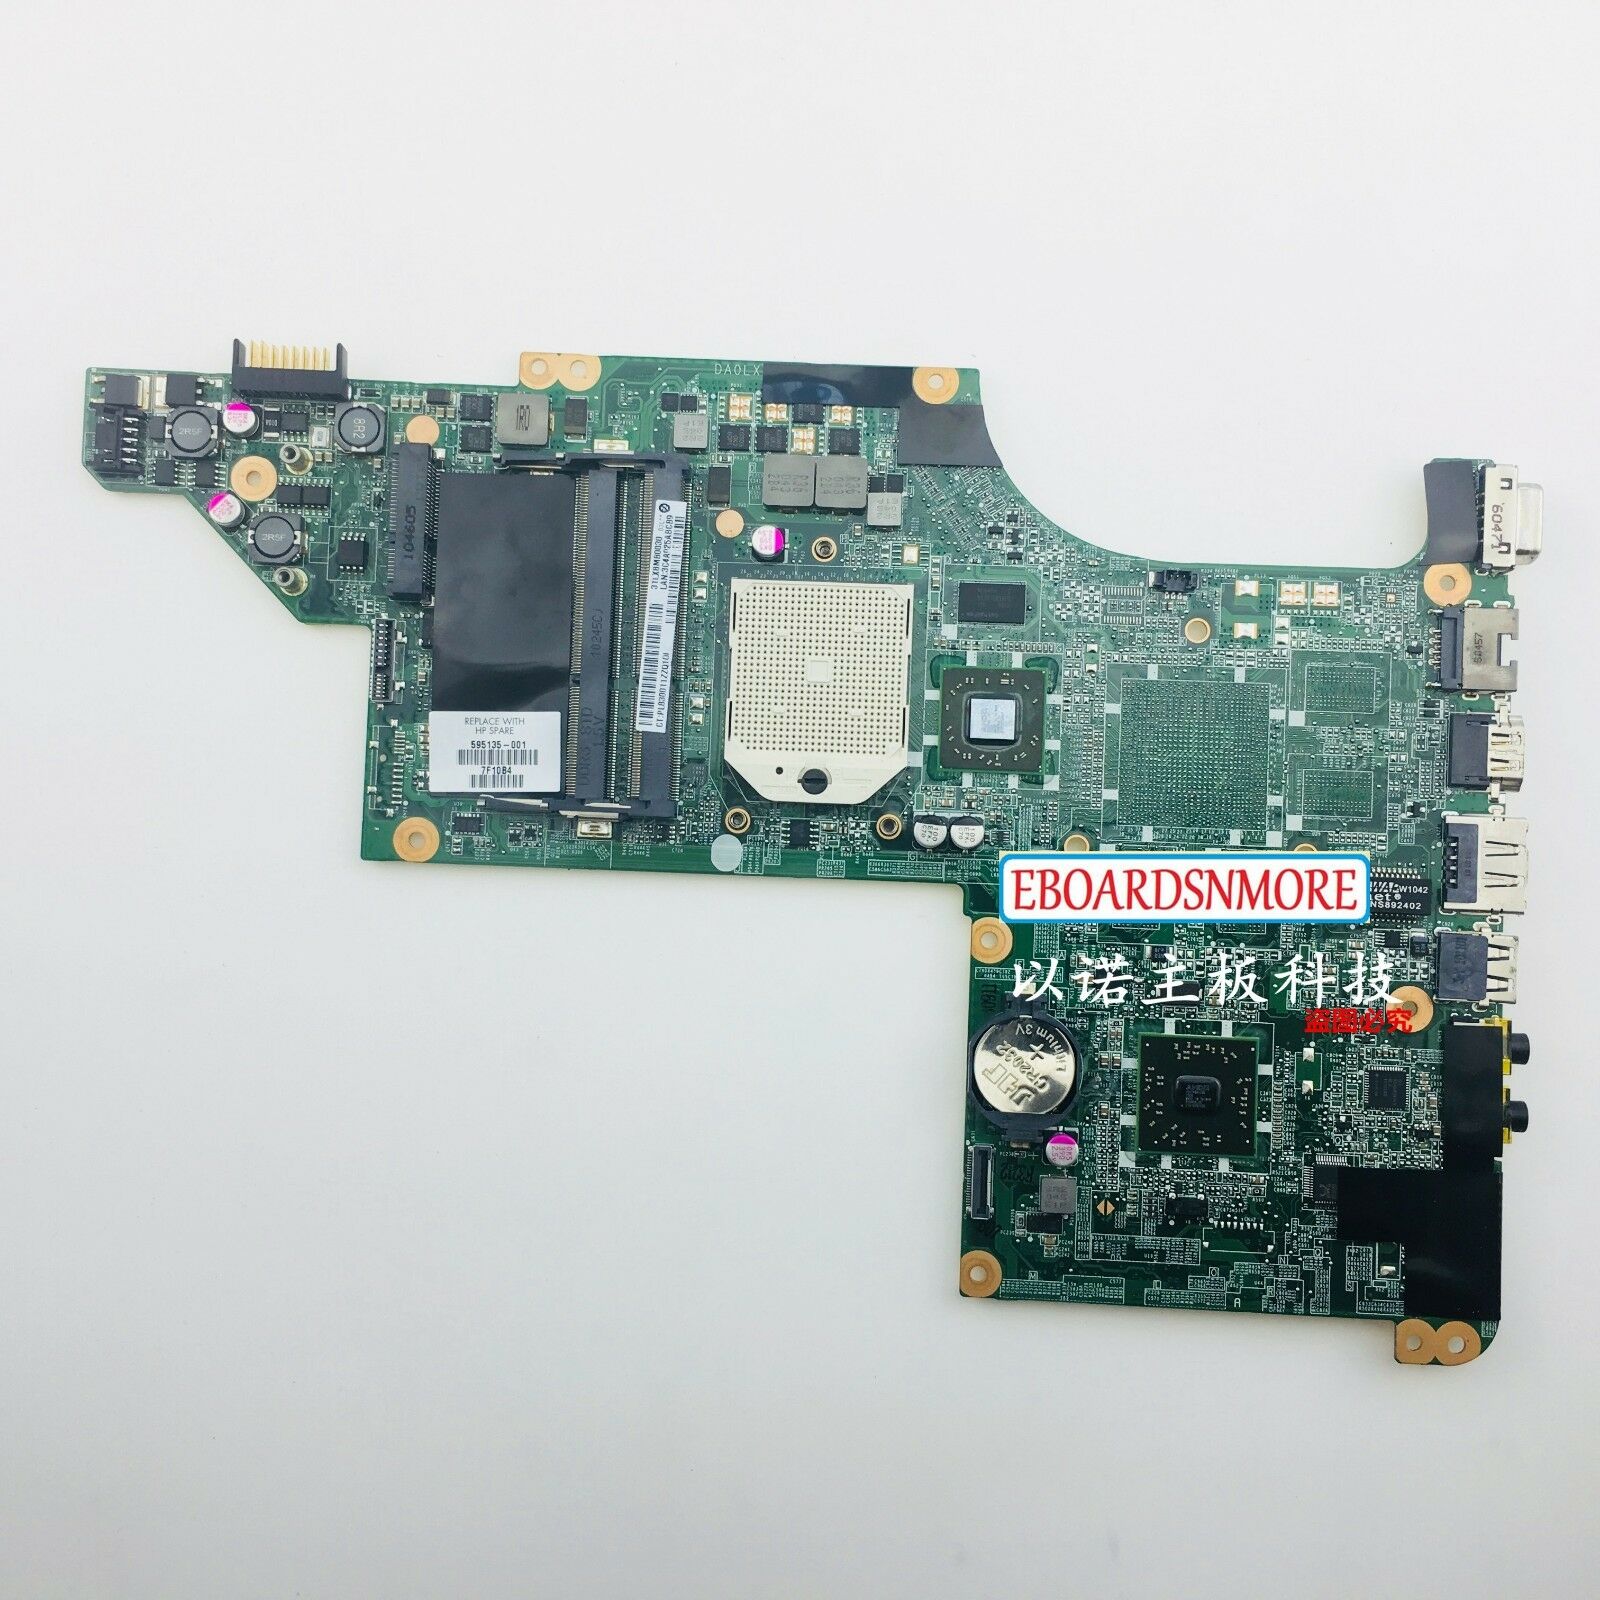 595135-001 AMD S1 Motherboard for HP Pavilion DV6 DV6-3000 Laptops, A Compatible CPU Brand: AMD MPN: 5951